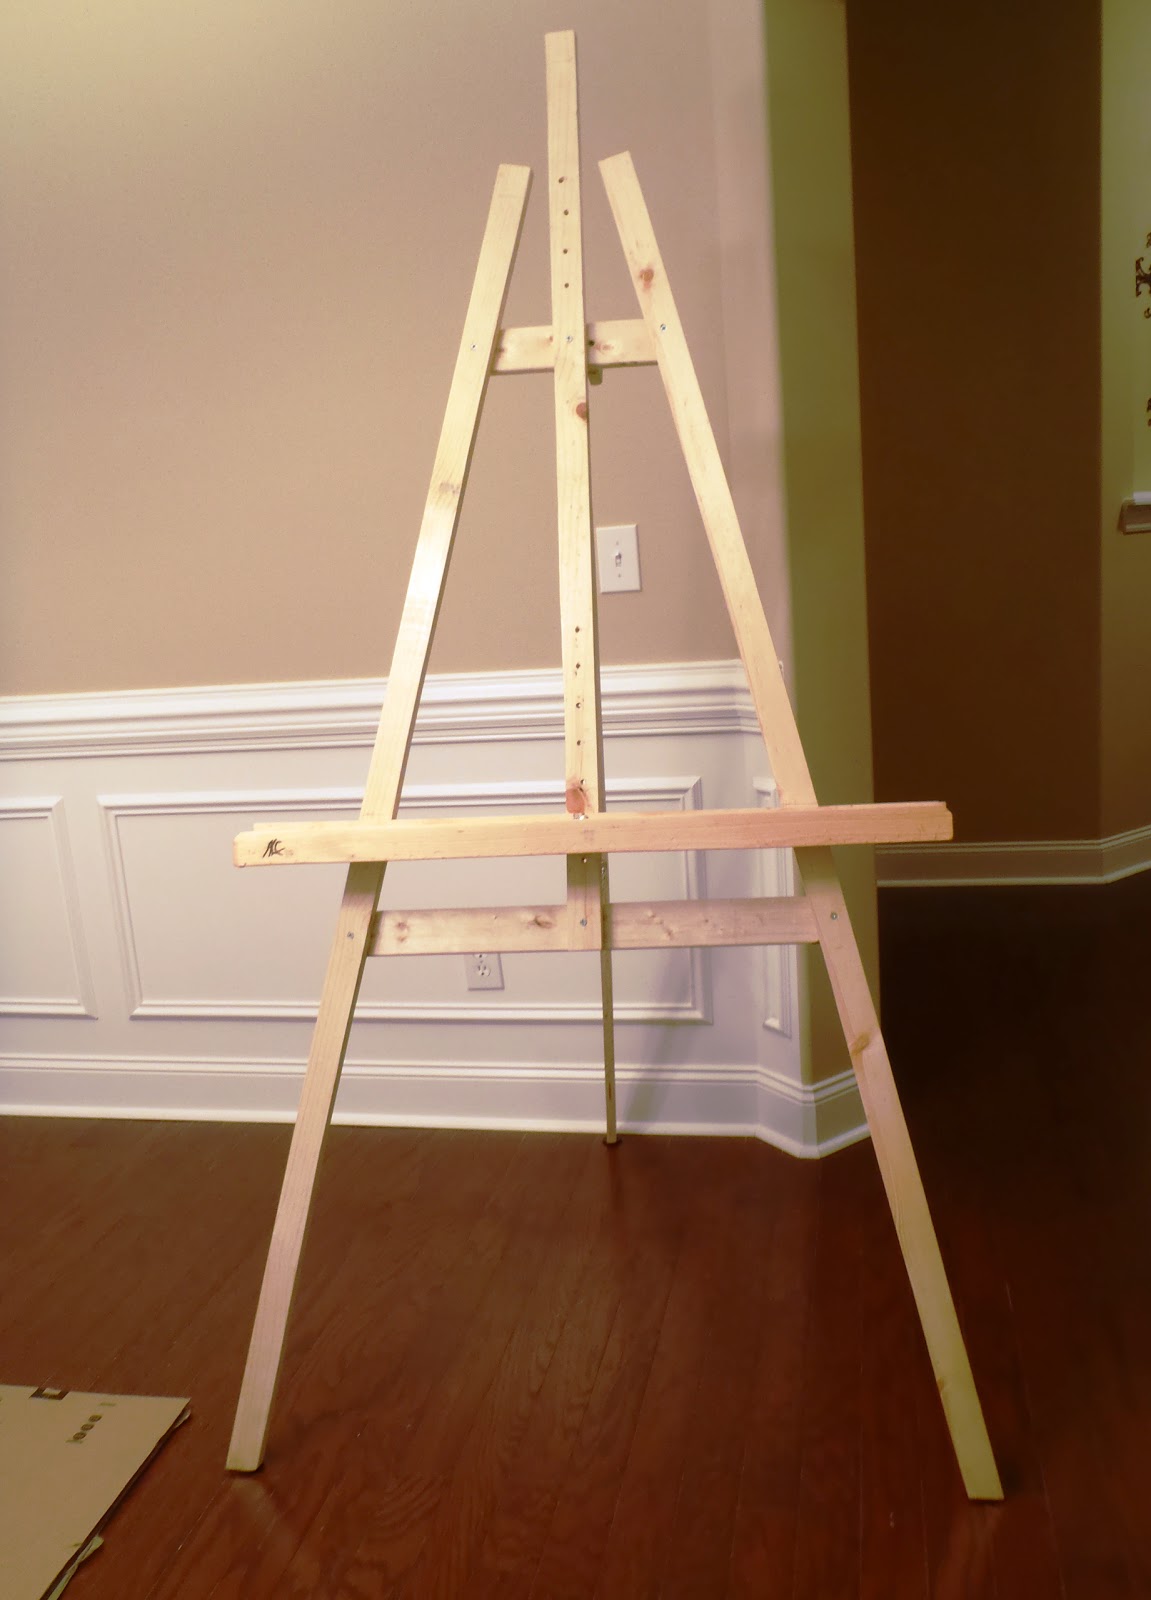 Build your own Table Top Easel on a budget! 